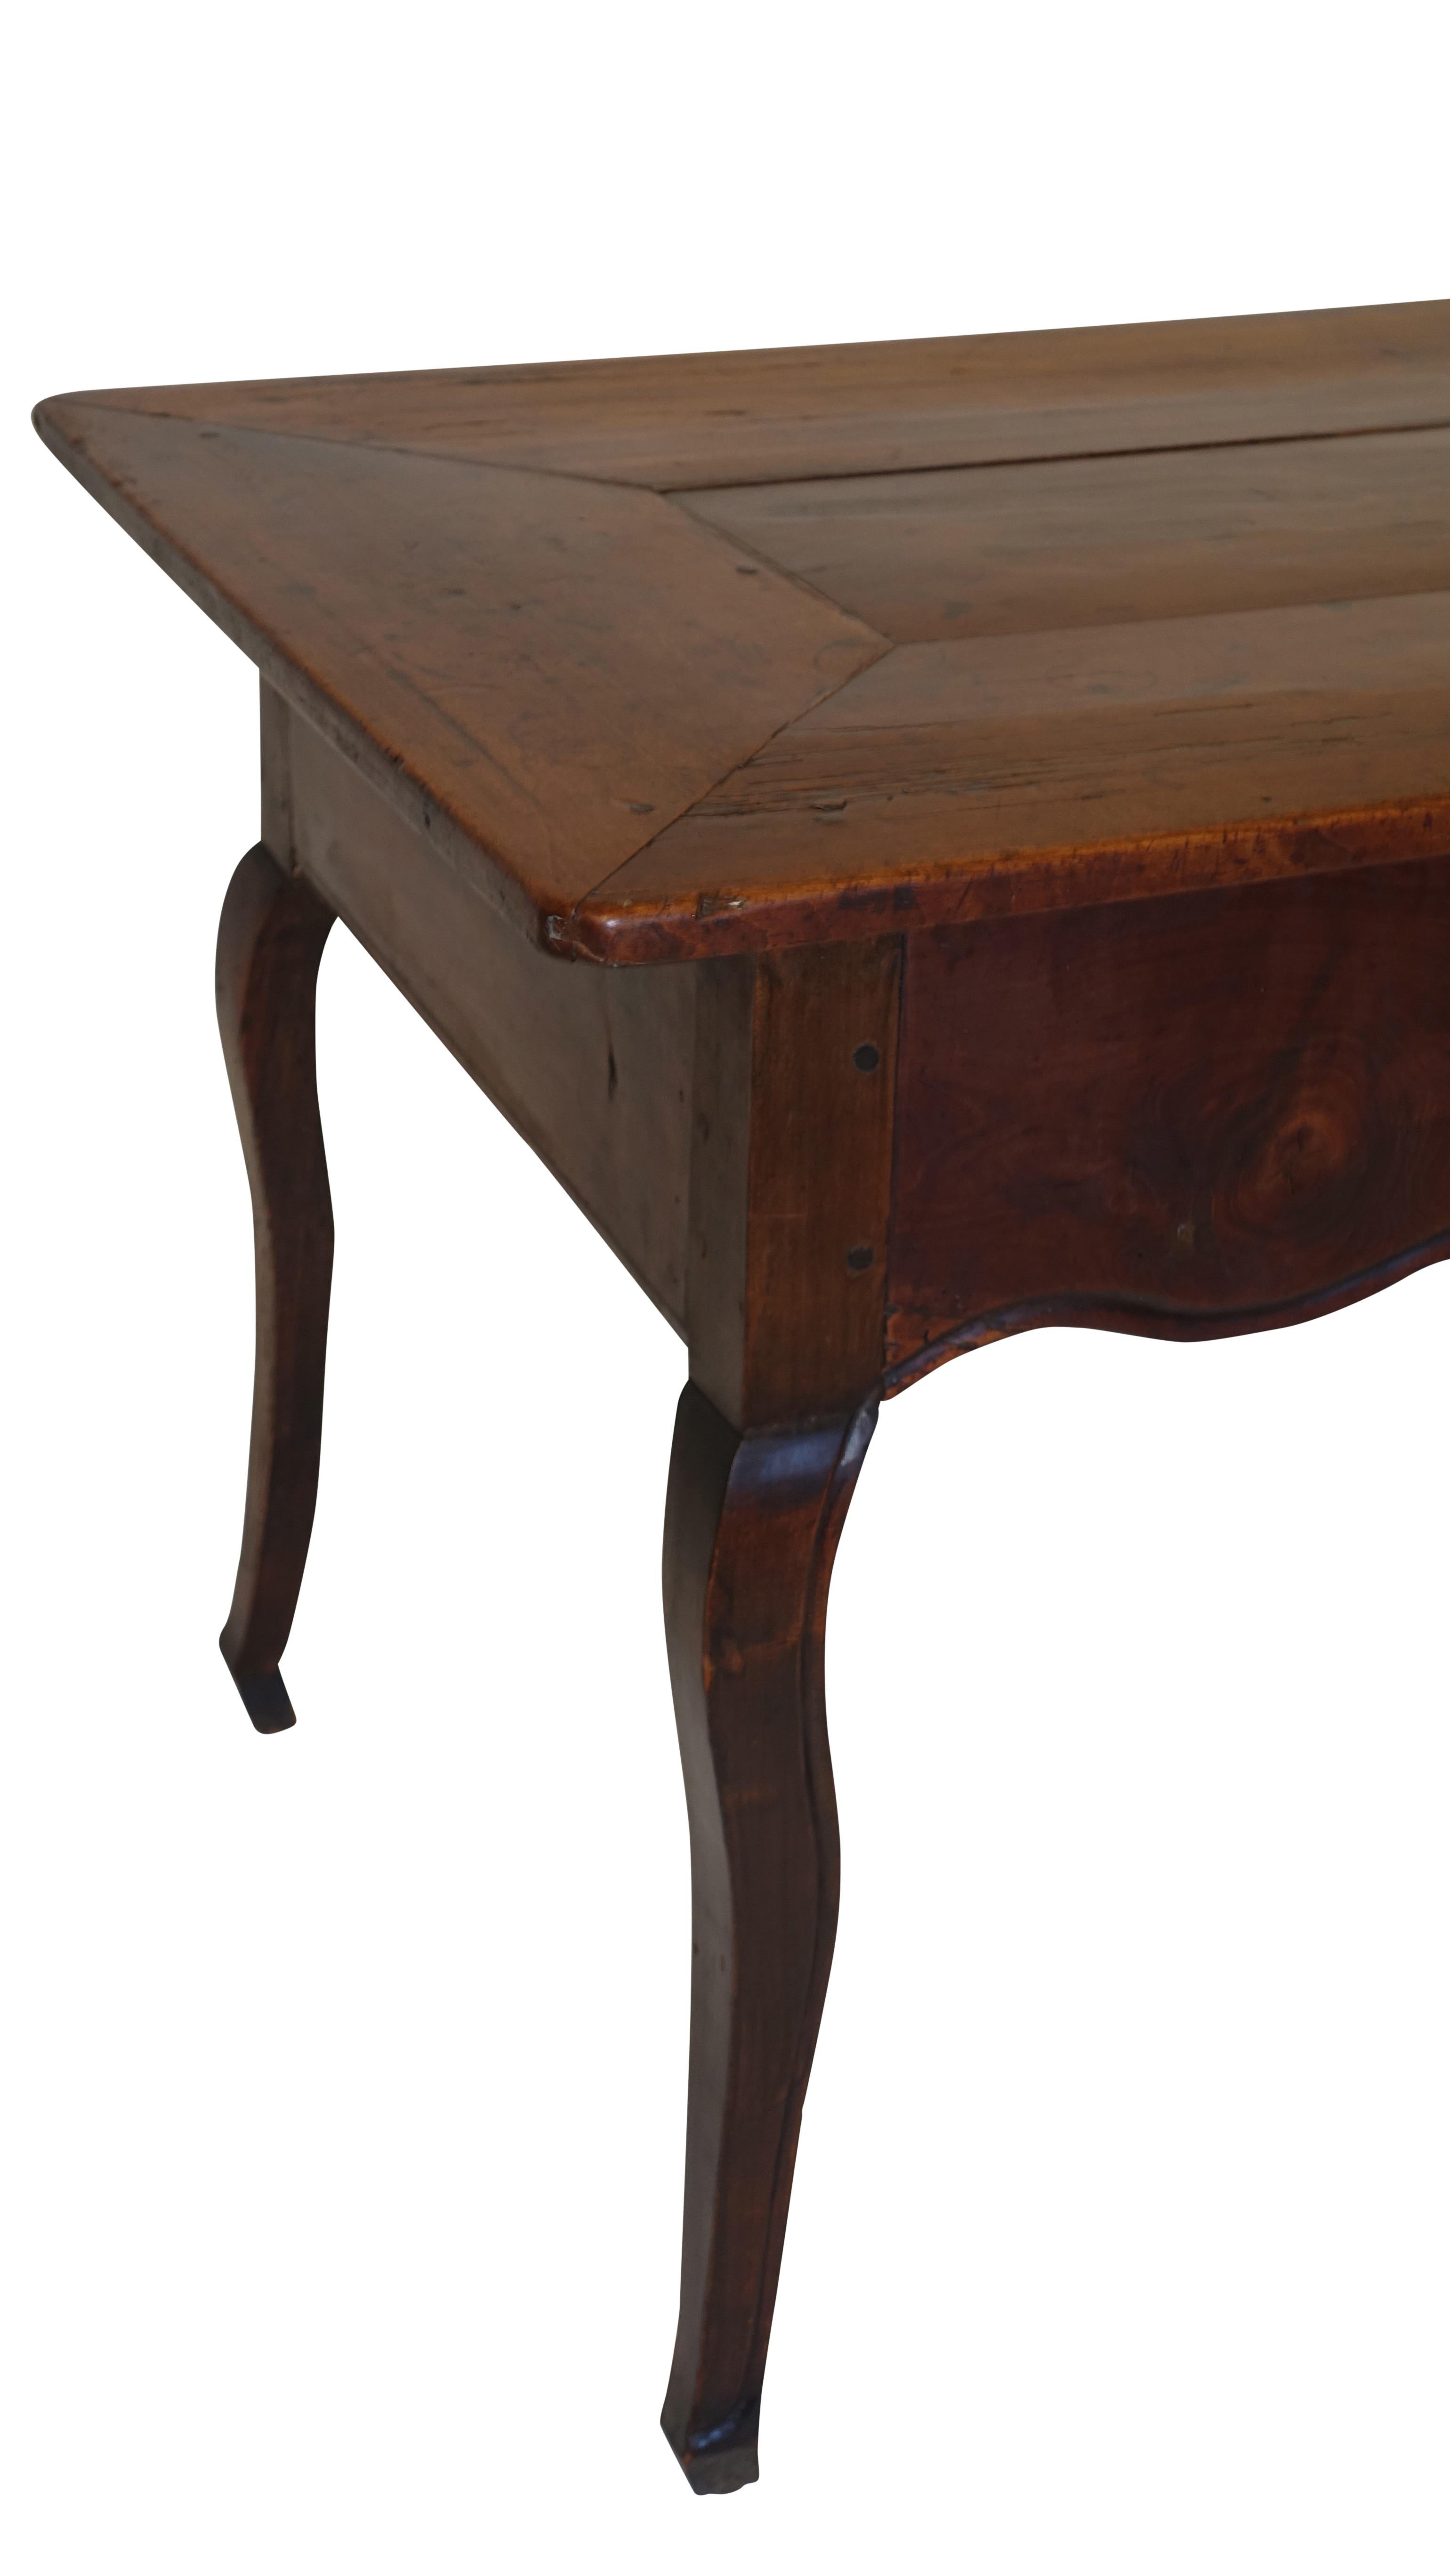 18th Century and Earlier Large French Country Style Walnut Desk or Table, 18th Century